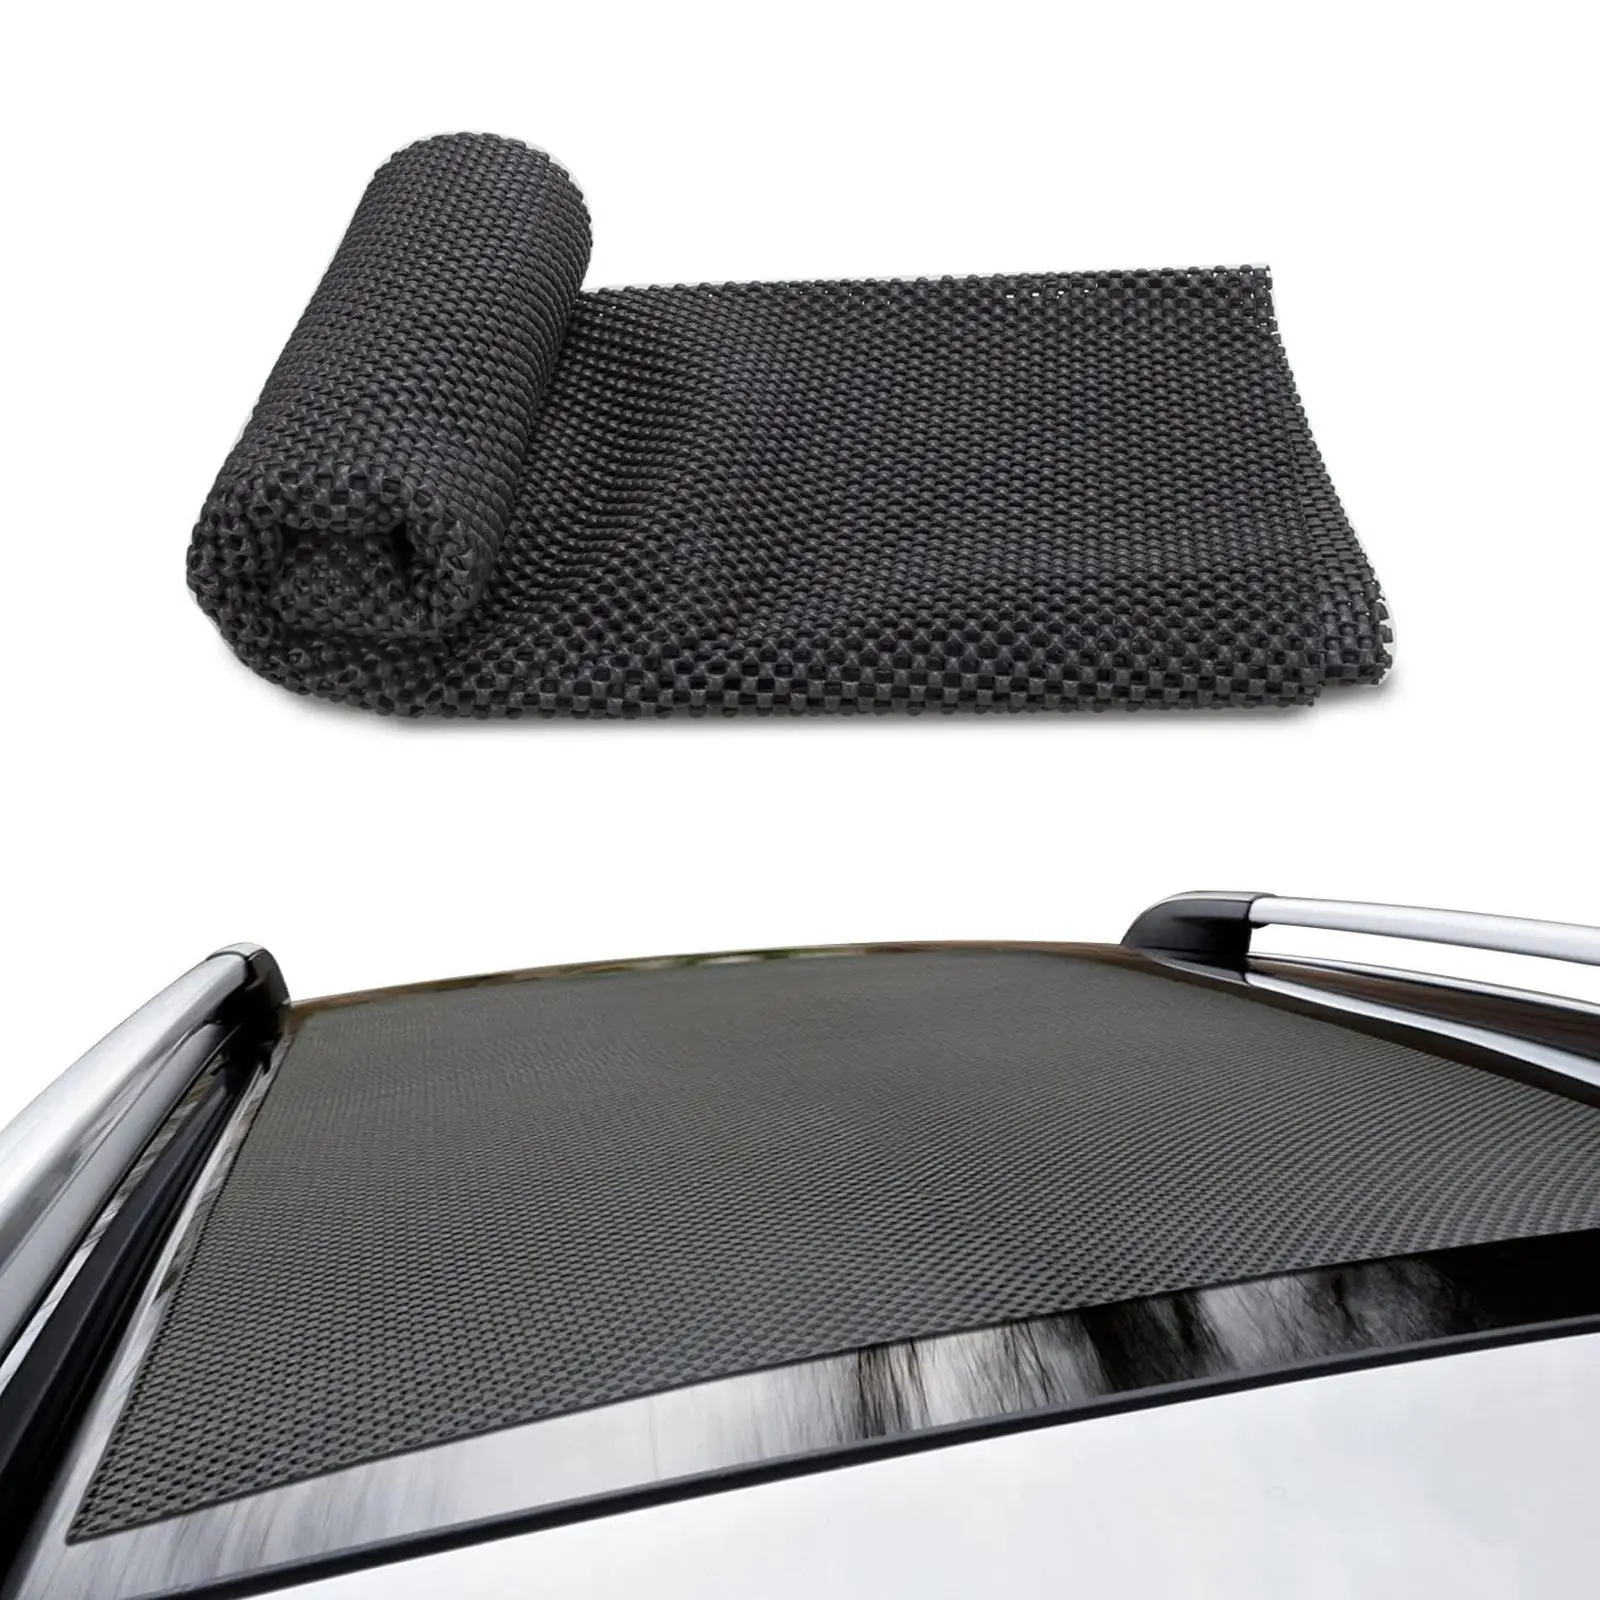 Waterproof, Oxford Cloth,  Luggage Storage Carrier Bag and Mat for Car SUV Soft Foldable